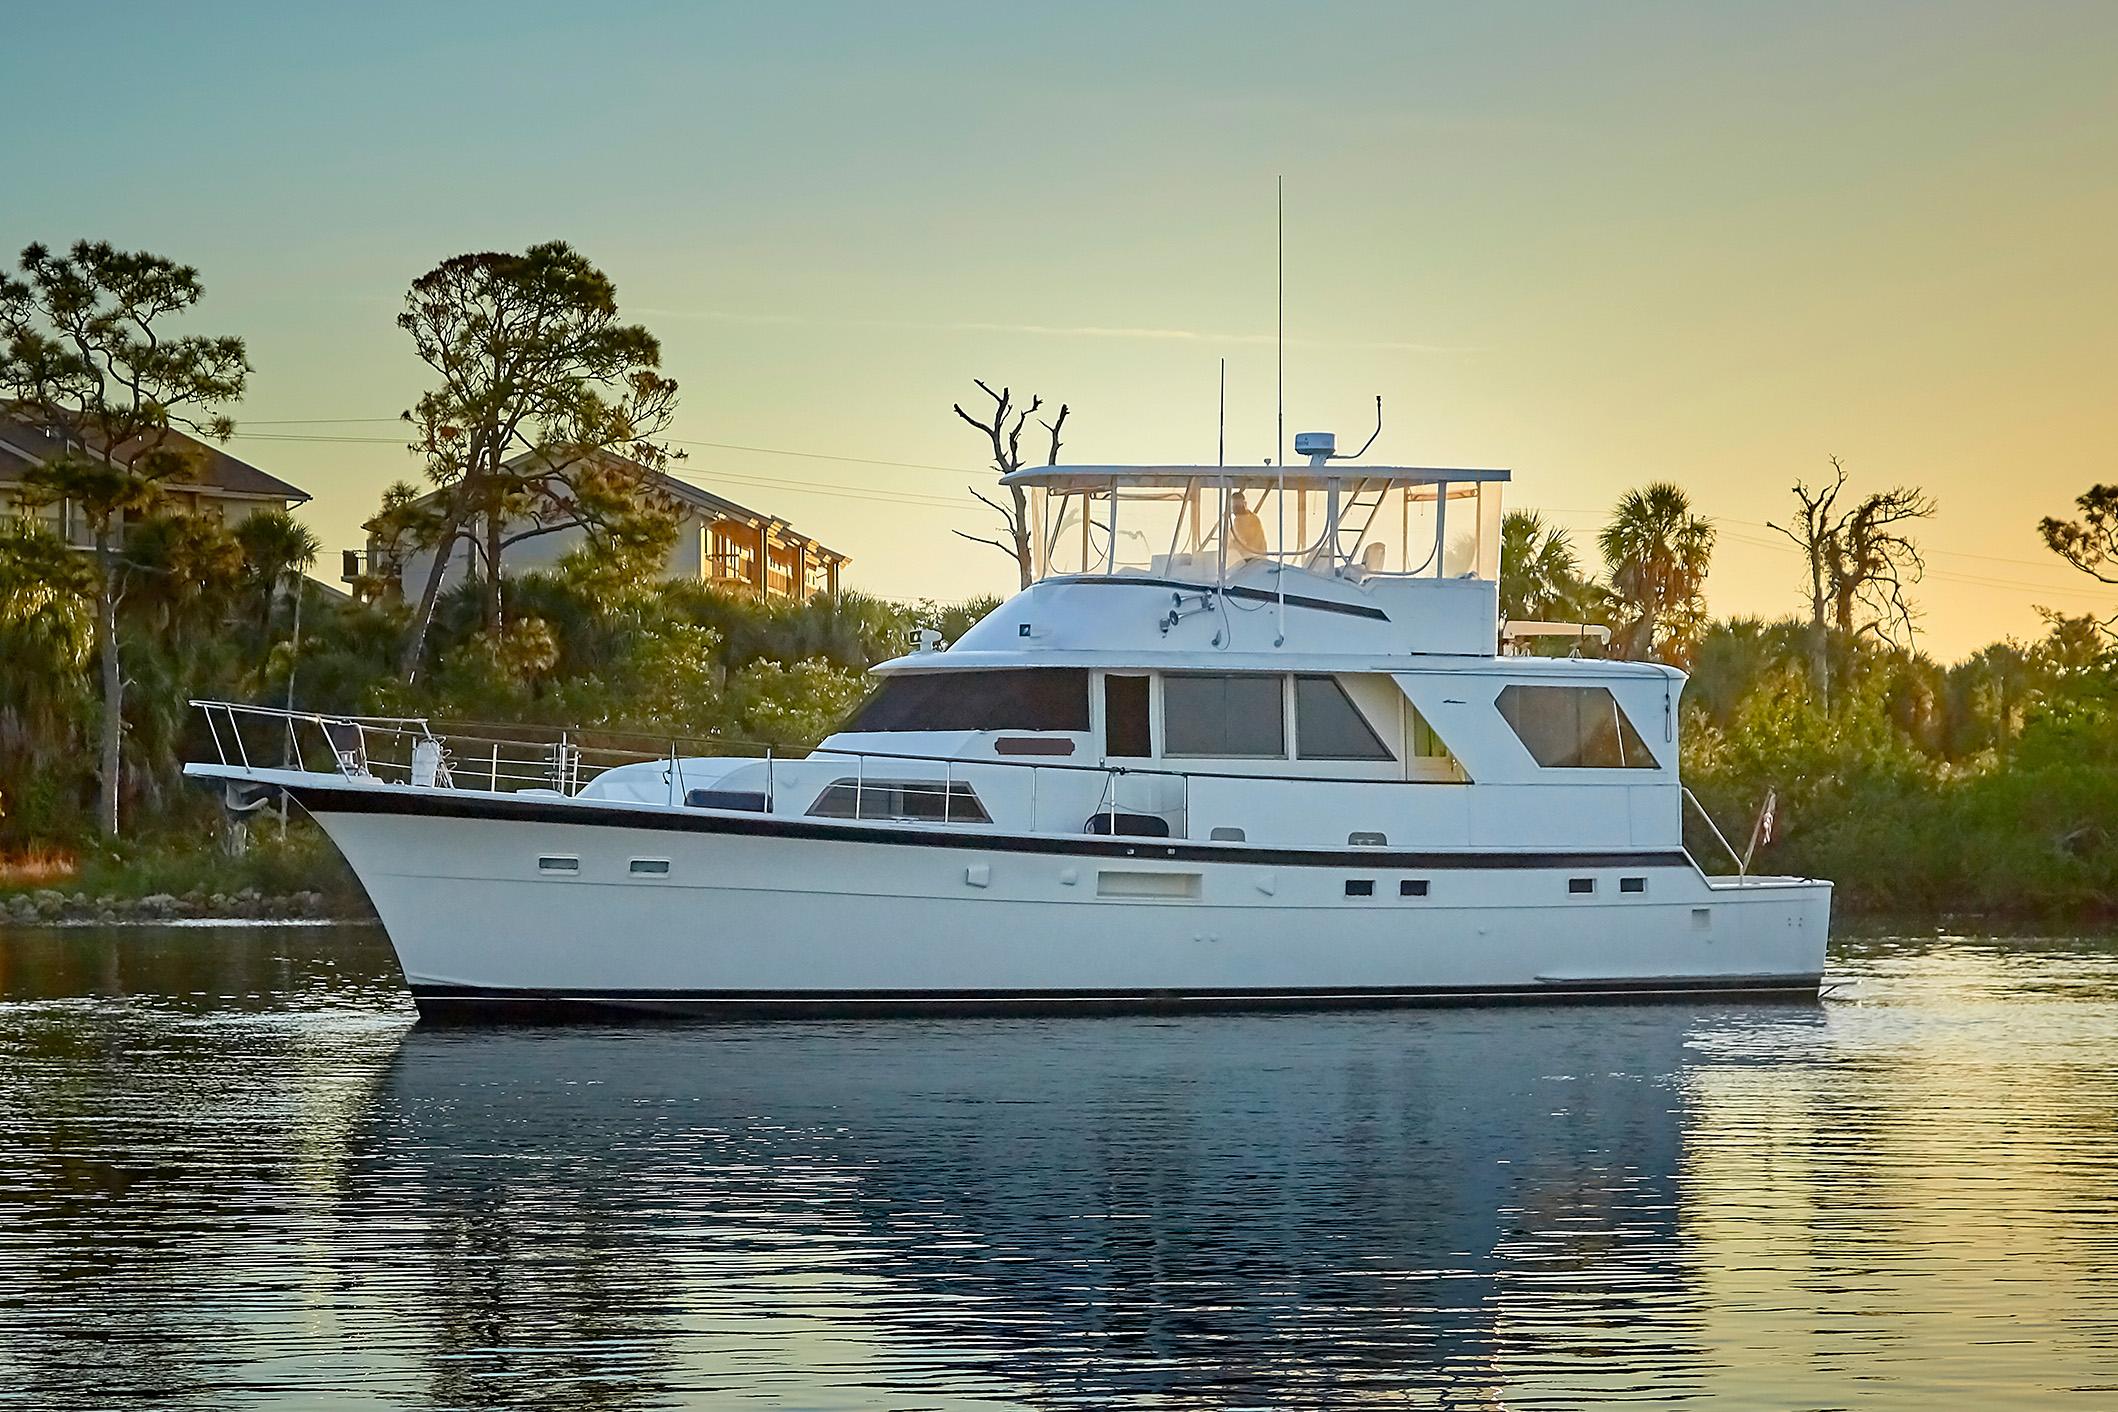 hatteras yachts ownership